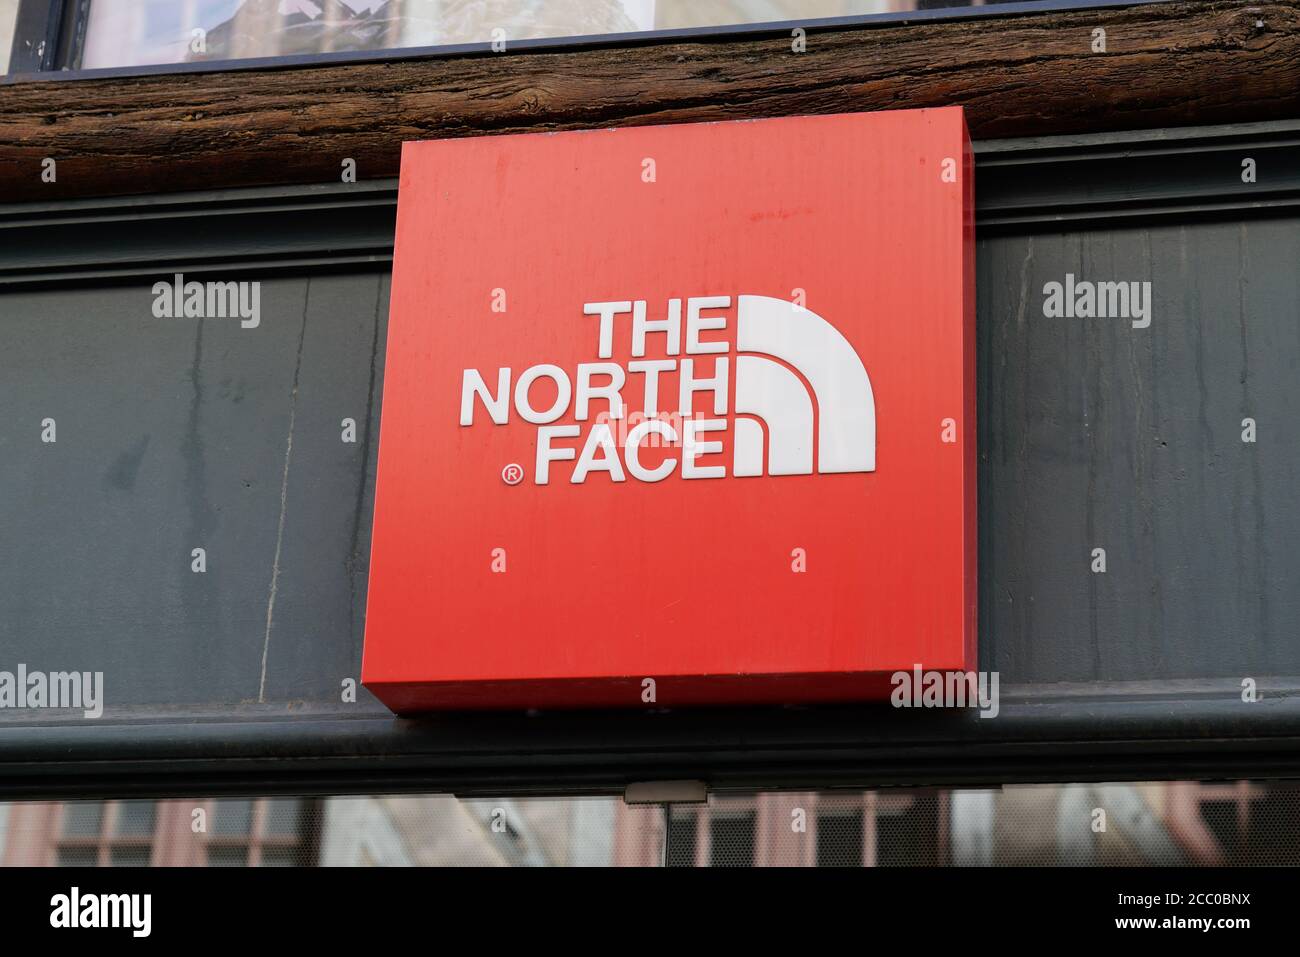 Bordeaux , Aquitaine / France - 08 10 2020 : the North Face logo and text  sign of retail clothing fashion store in exterior view Stock Photo - Alamy